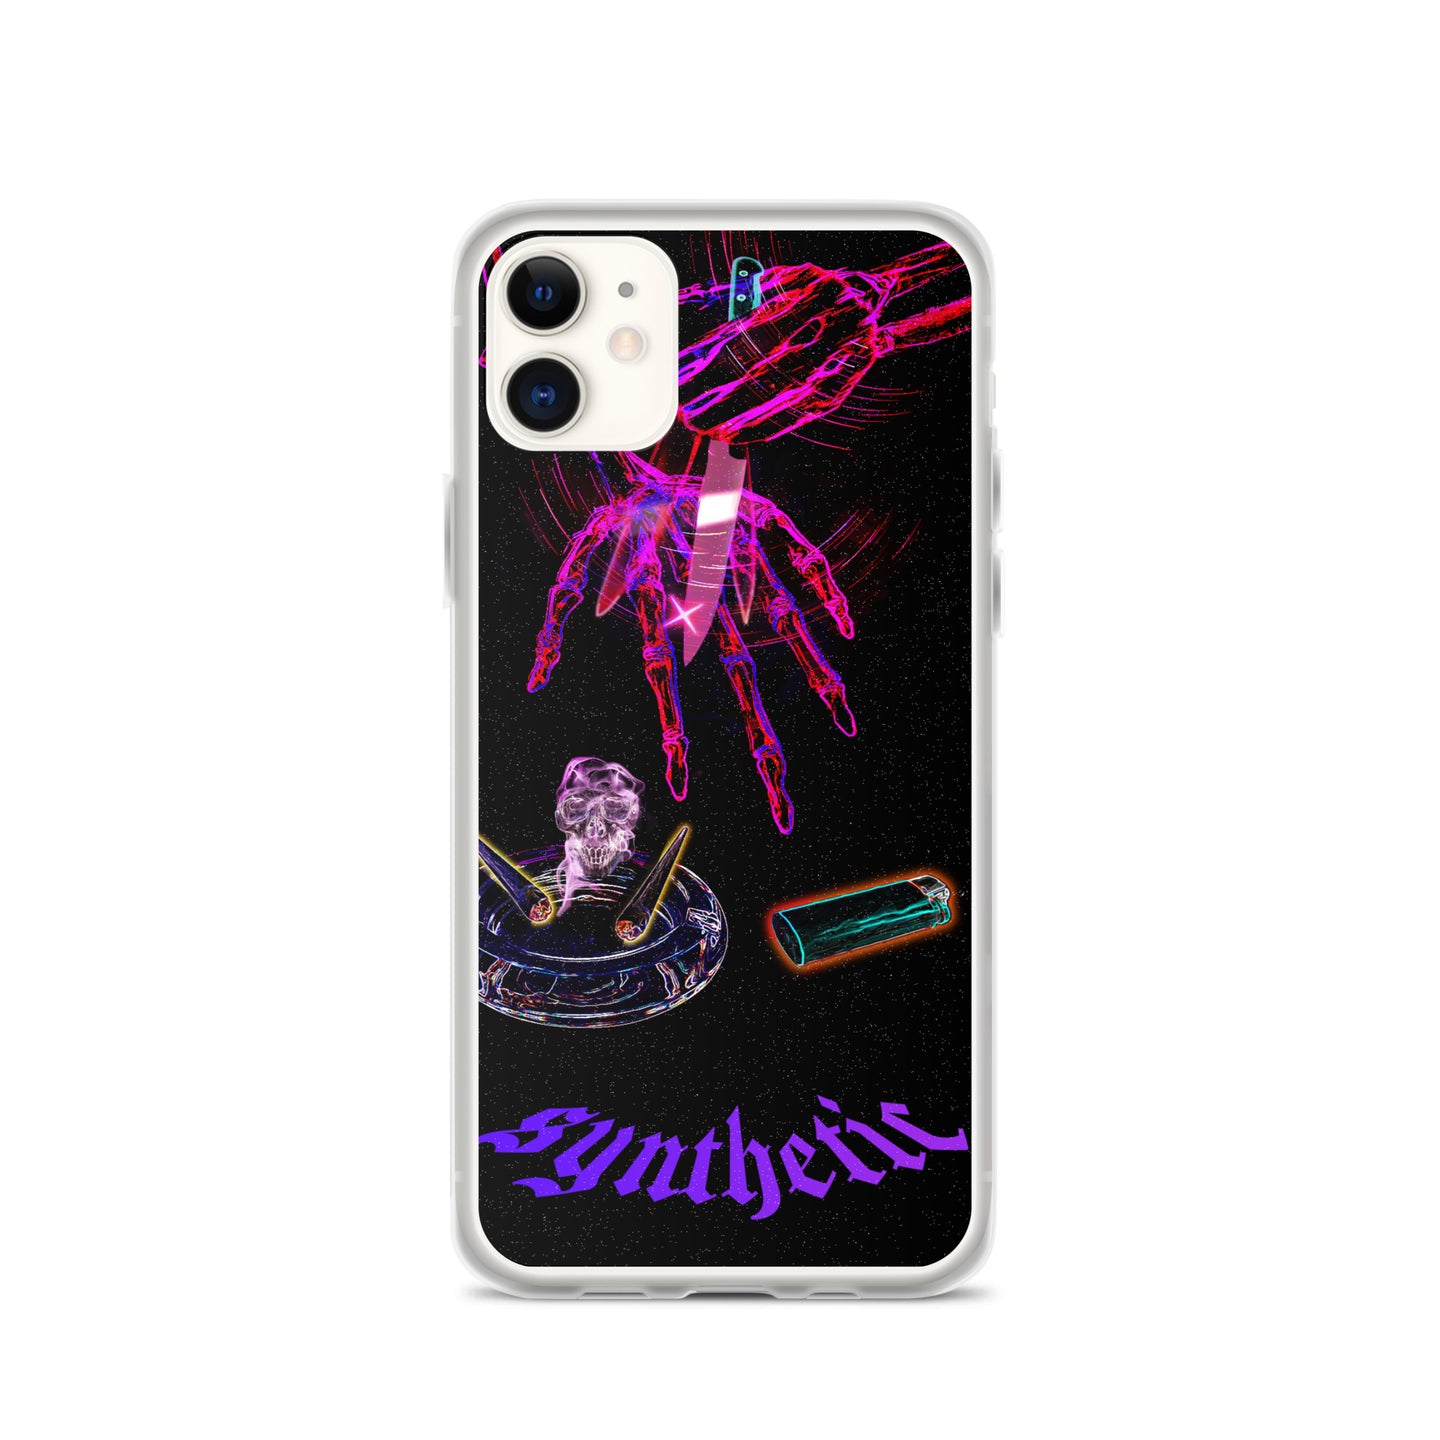 'the games we play' 2 iphone case